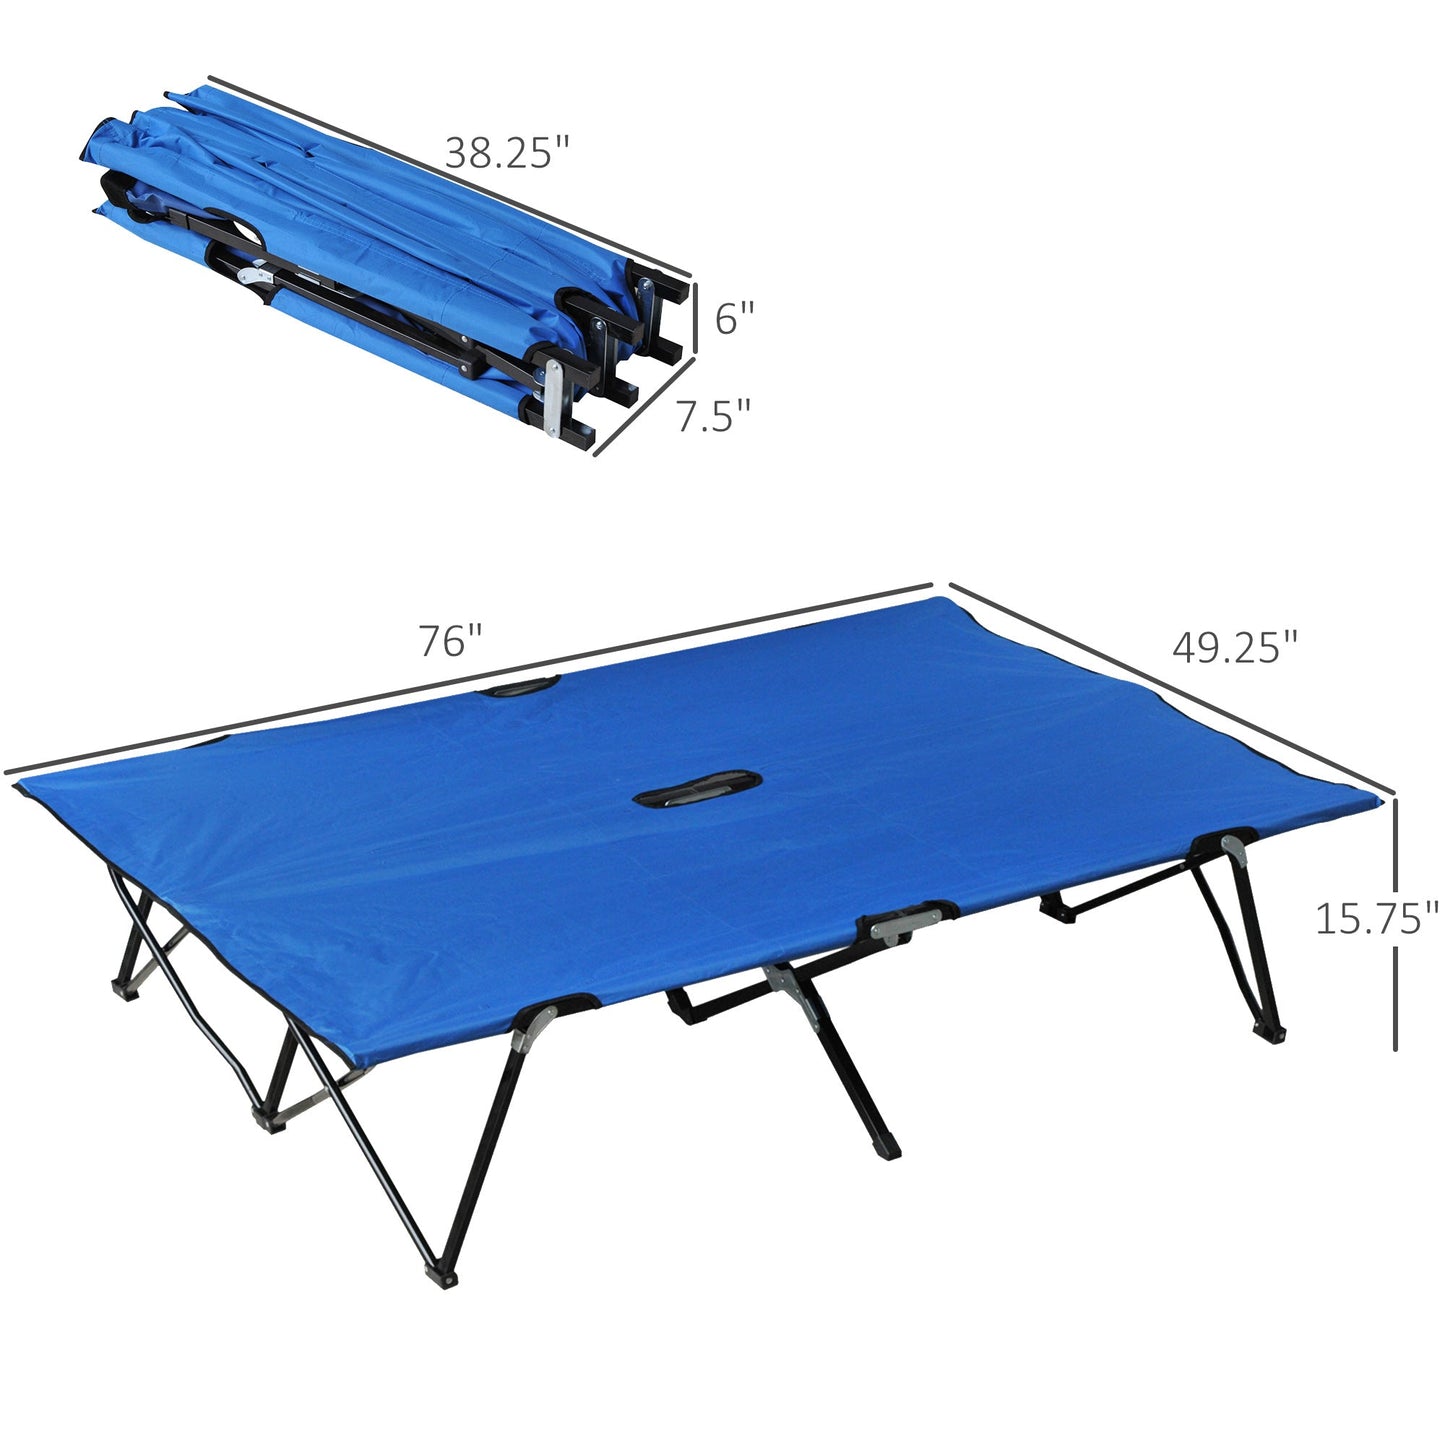 Miscellaneous-2 Person Folding Camping Cot for Adults, 50" Extra Wide Portable Sleeping Cot with Carry Bag, Elevated Camping Bed, Beach Hiking, Blue - Outdoor Style Company